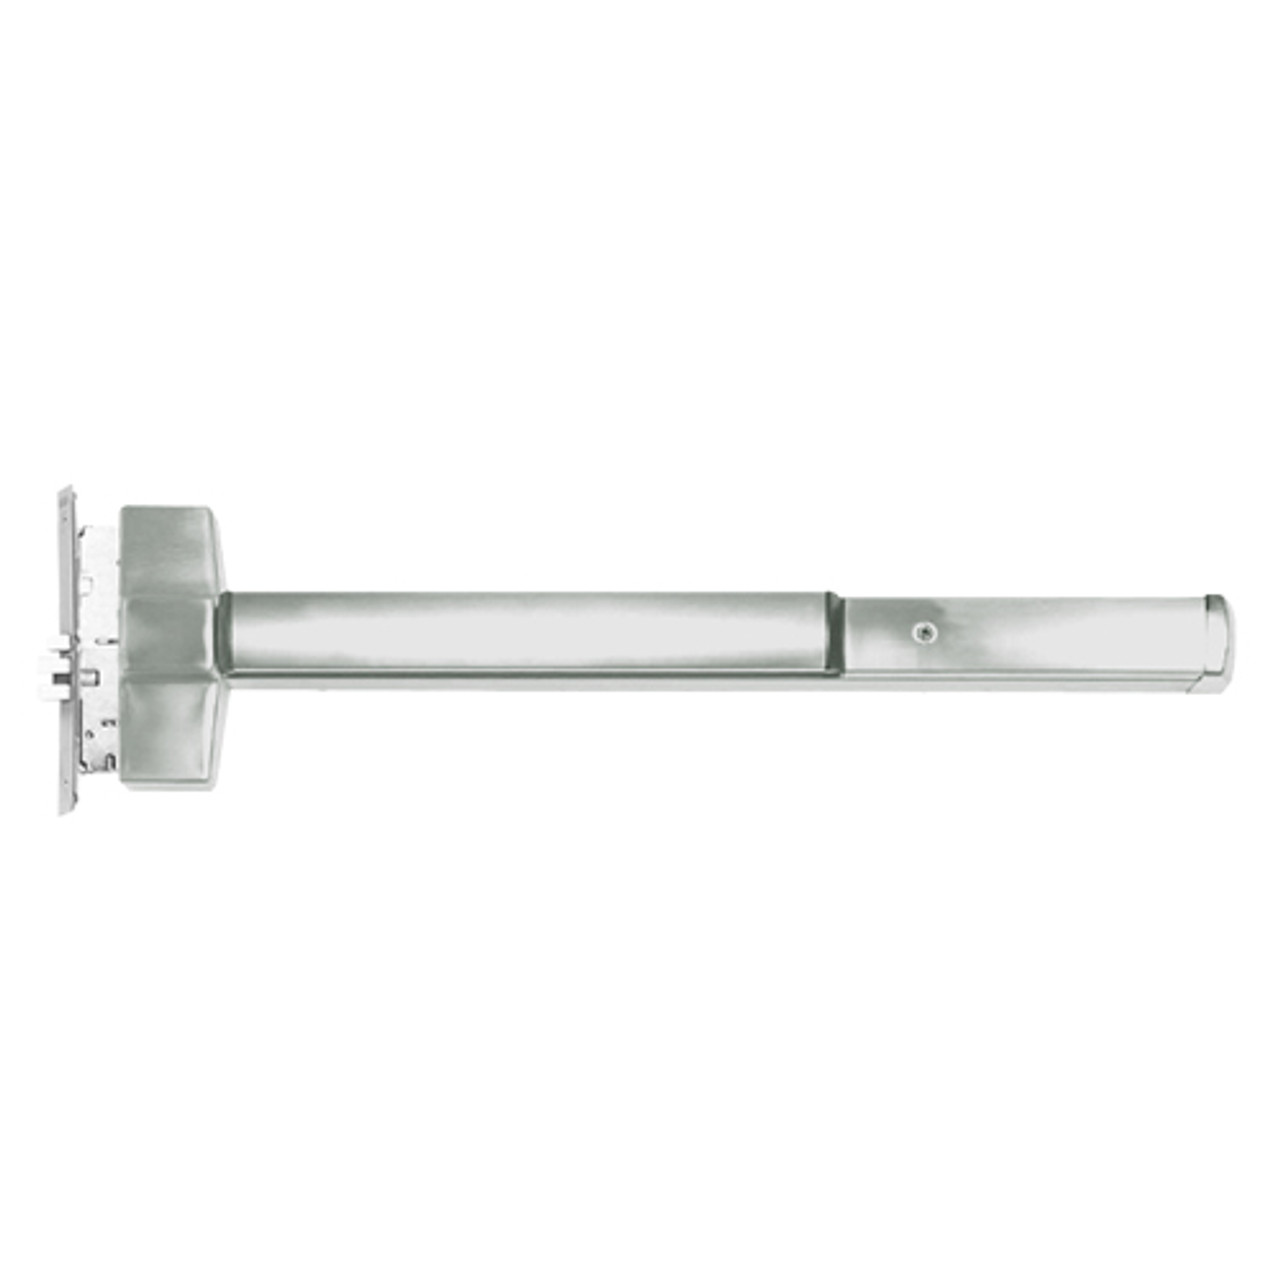 ED5600T-619-W048-RHR Corbin ED5600 Series Non Fire Rated Mortise Exit Device in Satin Nickel Finish